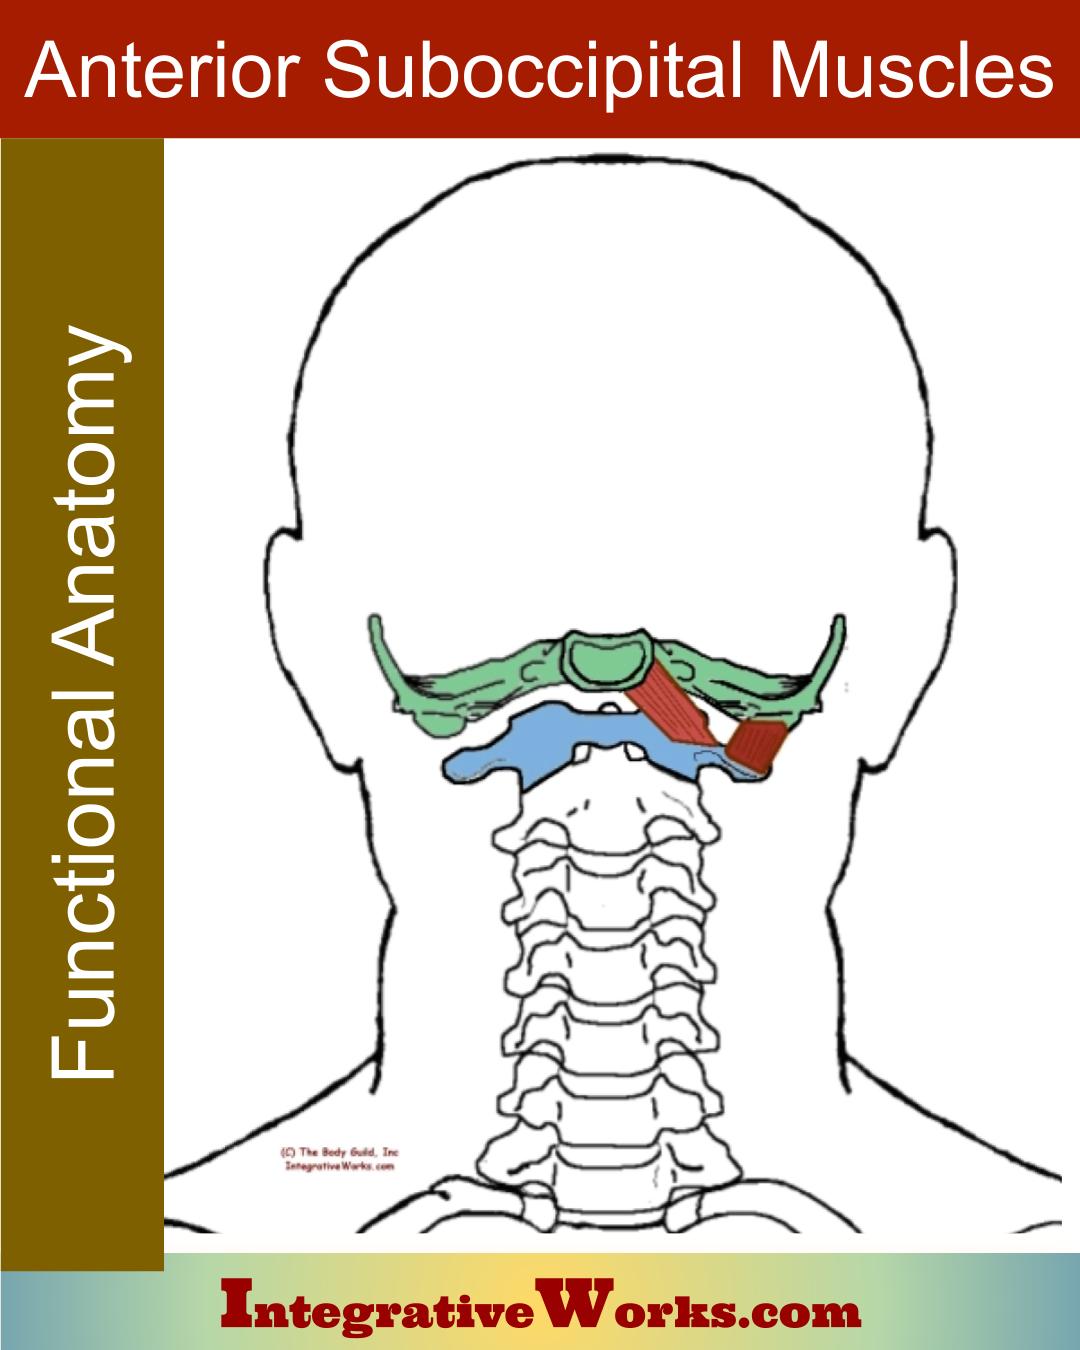 Anterior Suboccipital Muscles Functional Anatomy Integrative Works 3273